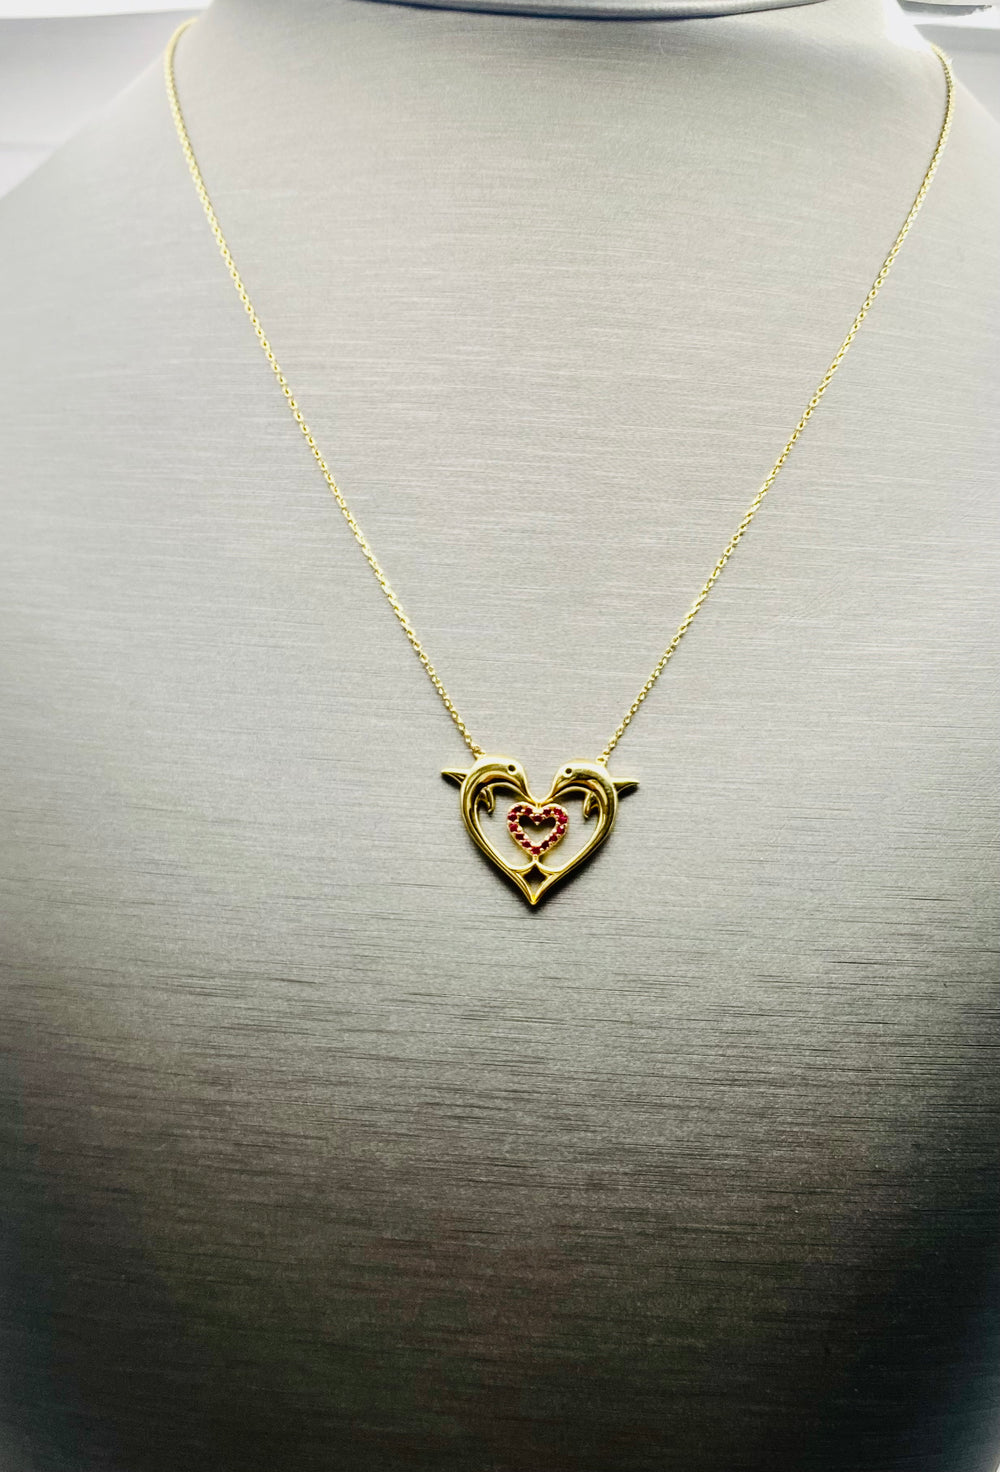 Real 10KT Gold Chain & ‘Dolphin Heart’ Charm with Cubic Zirconia Stones